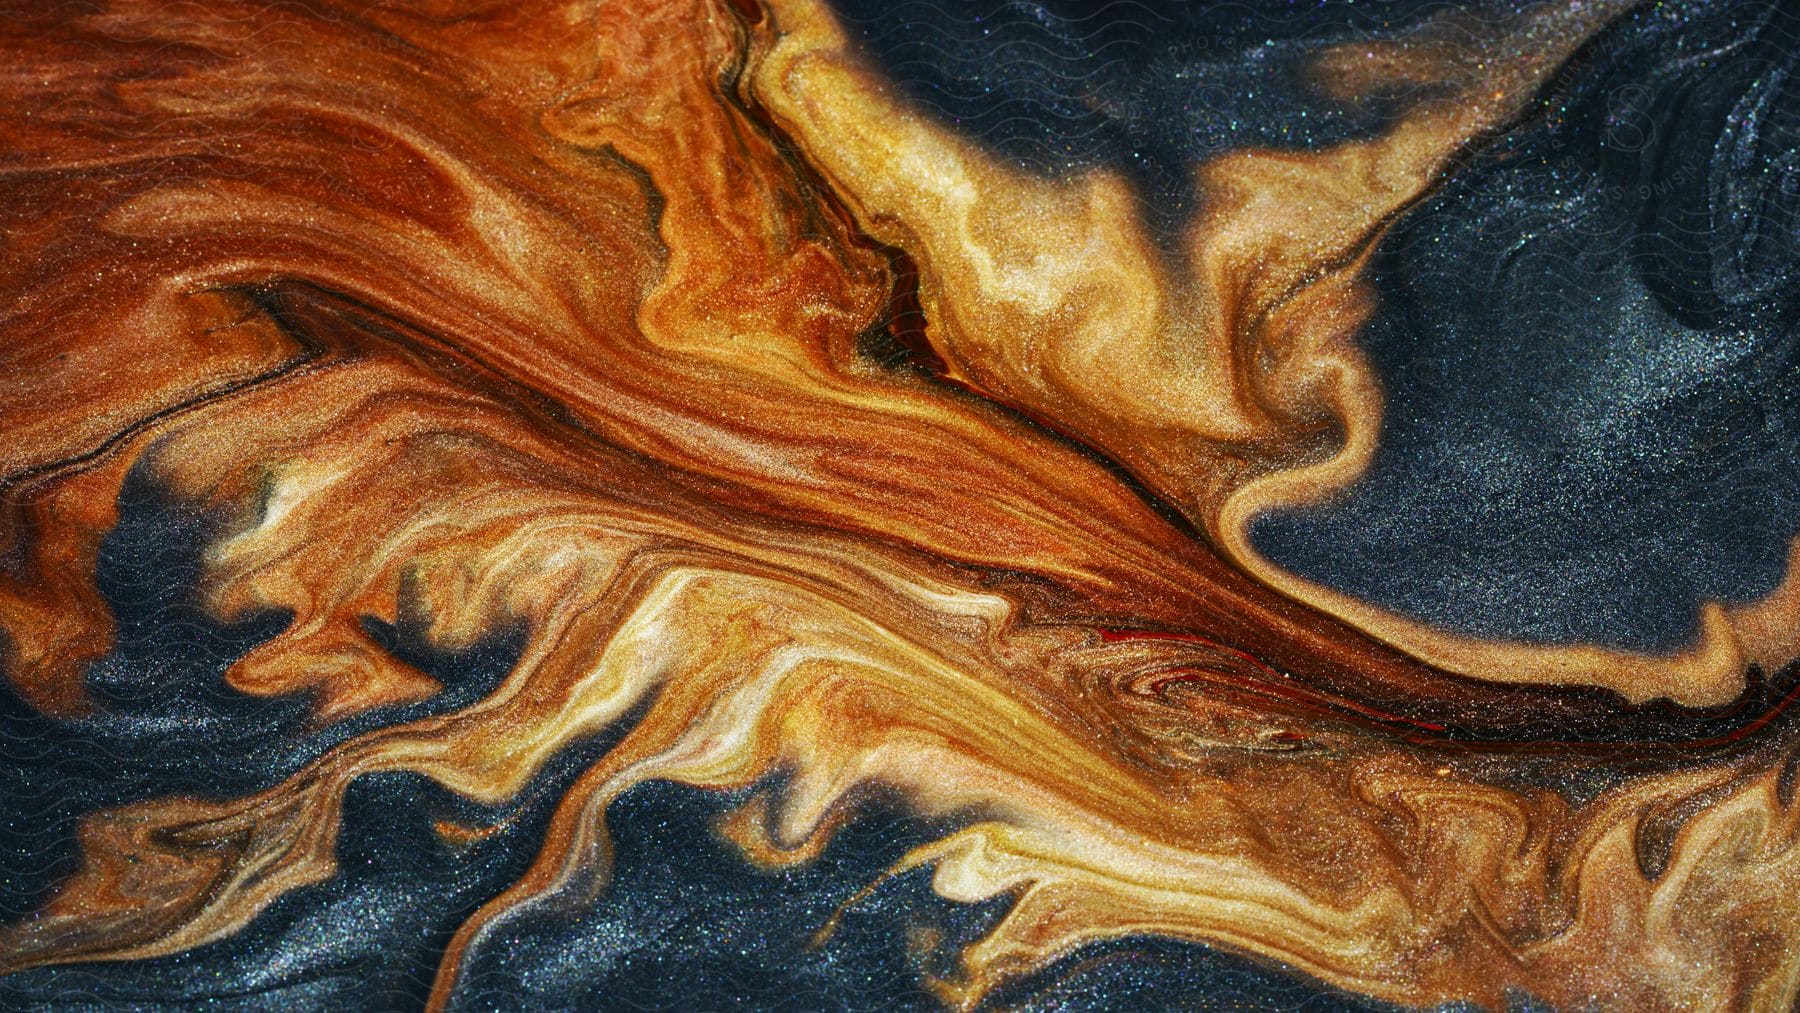 Stock photo of textured flames contrast with black background on canvas.